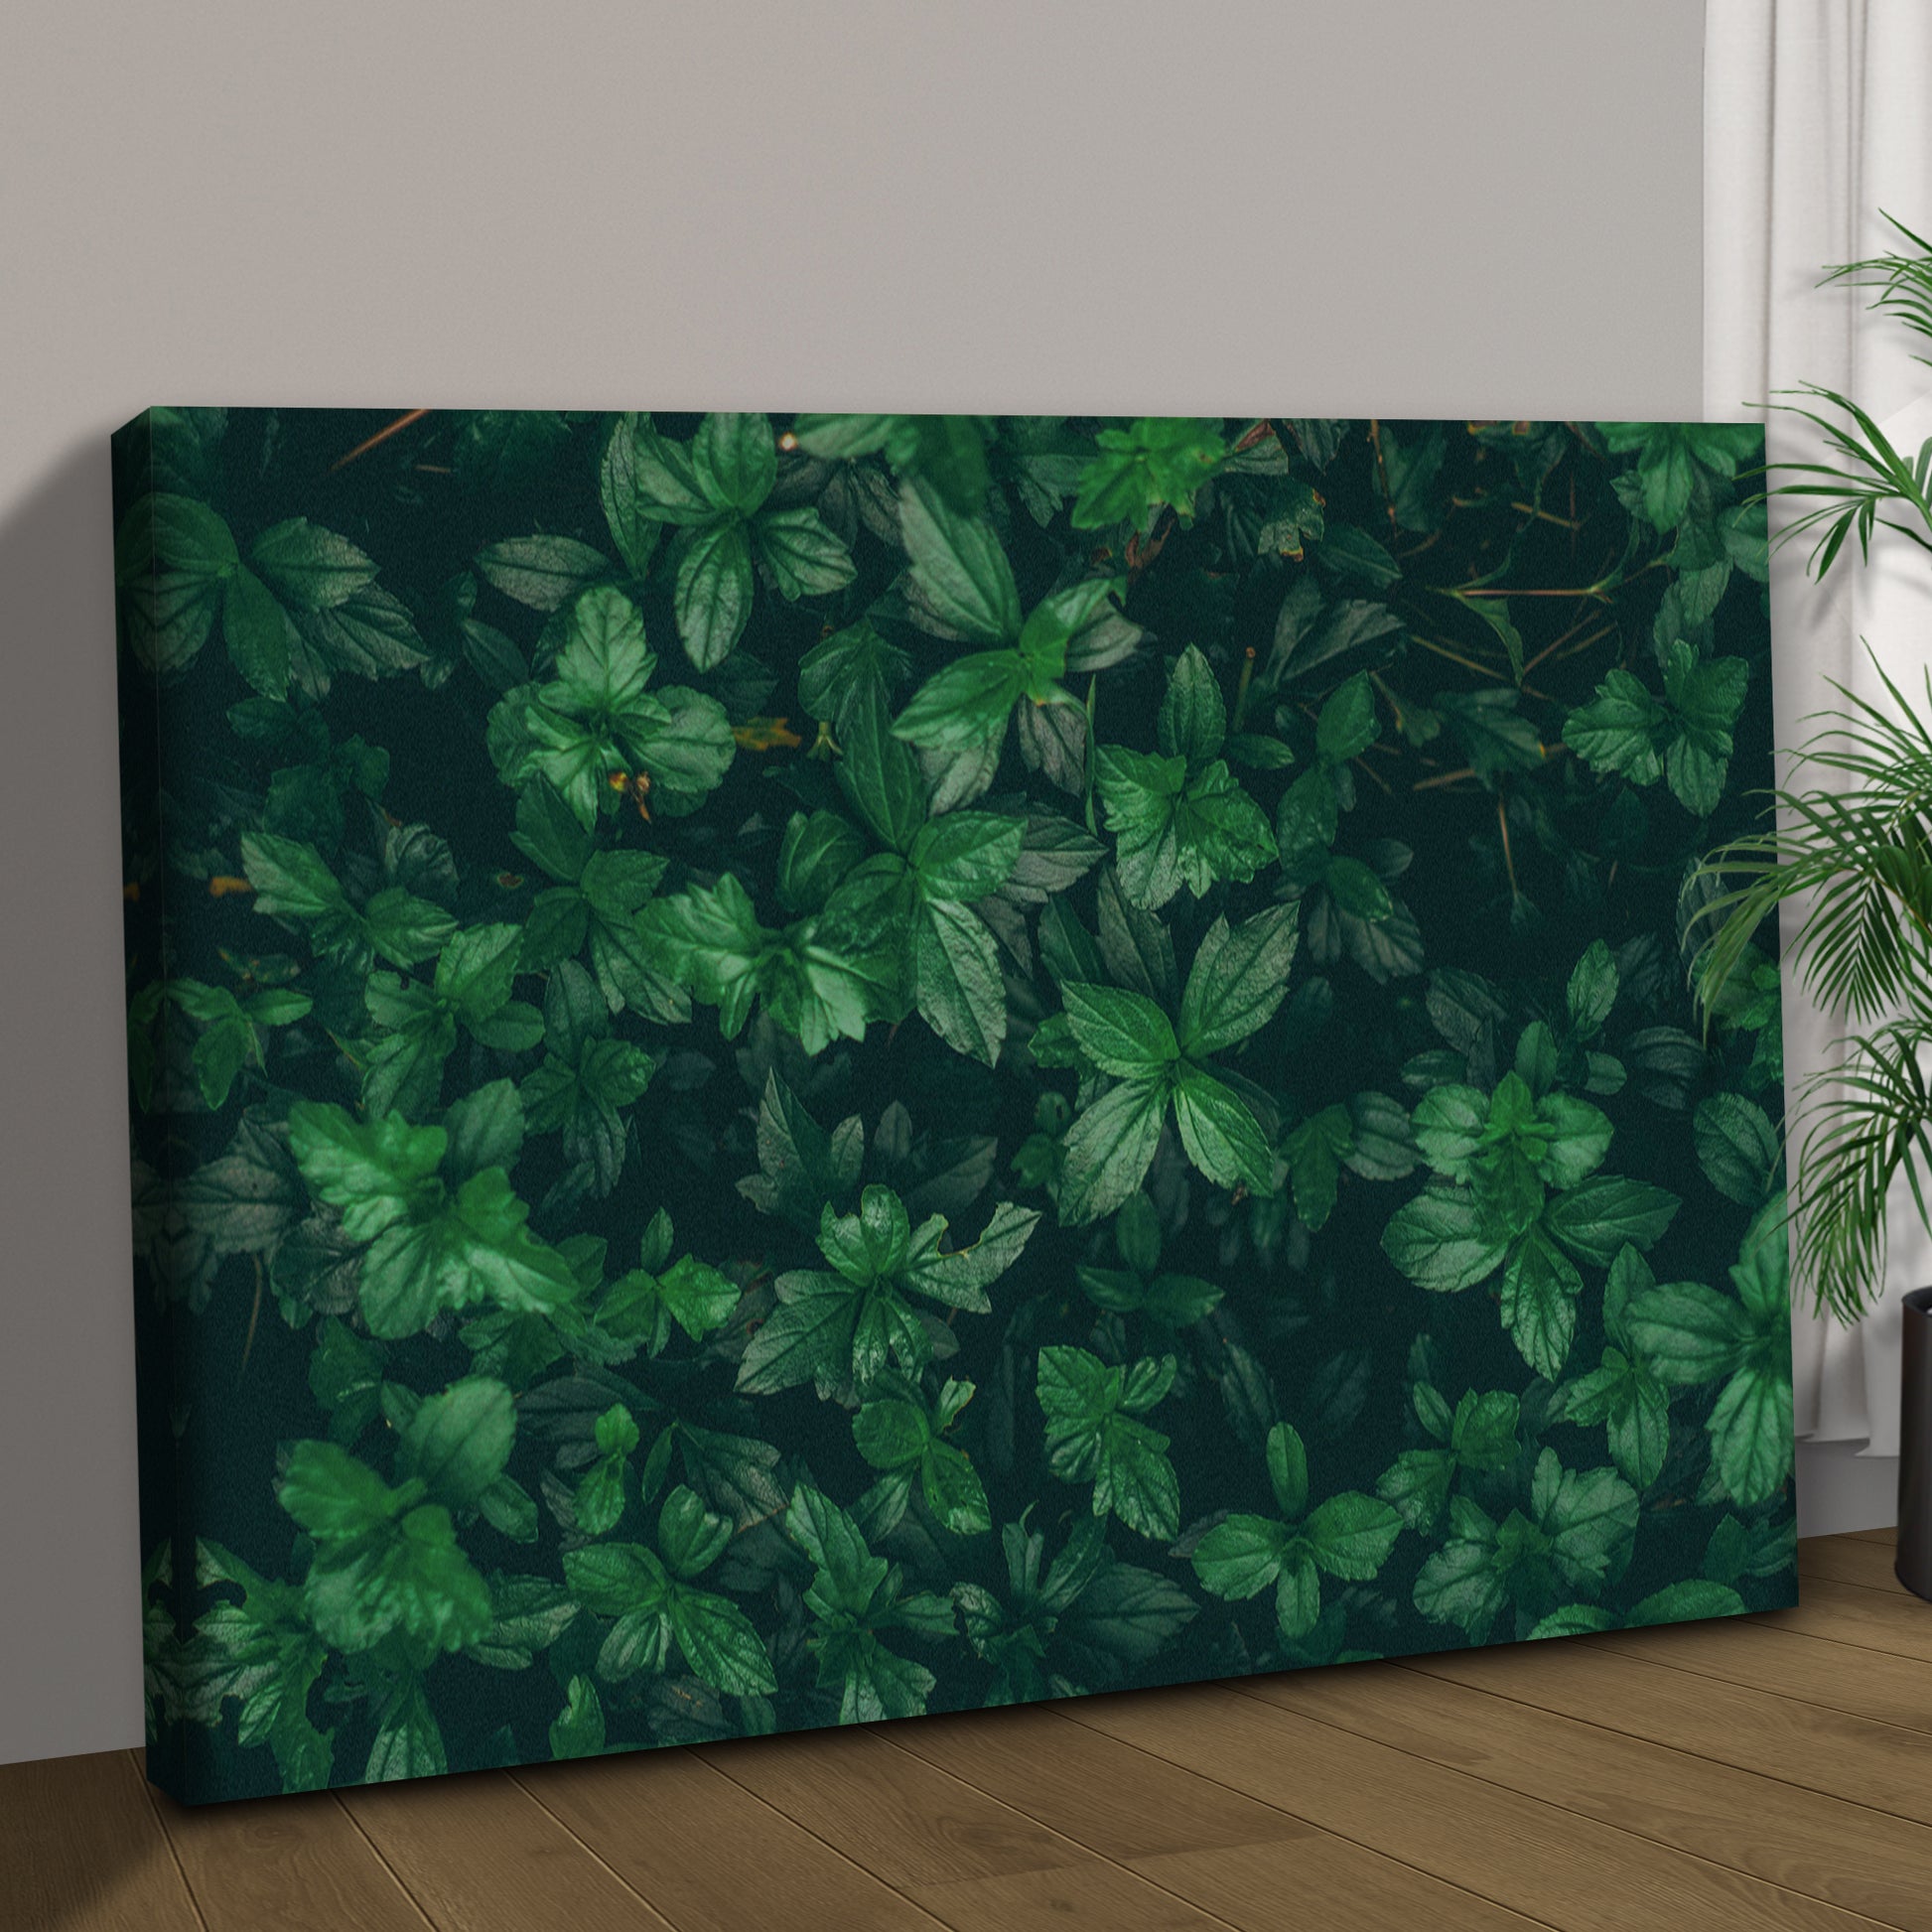 Green Leaves Canvas Wall Art Style 1 - Image by Tailored Canvases